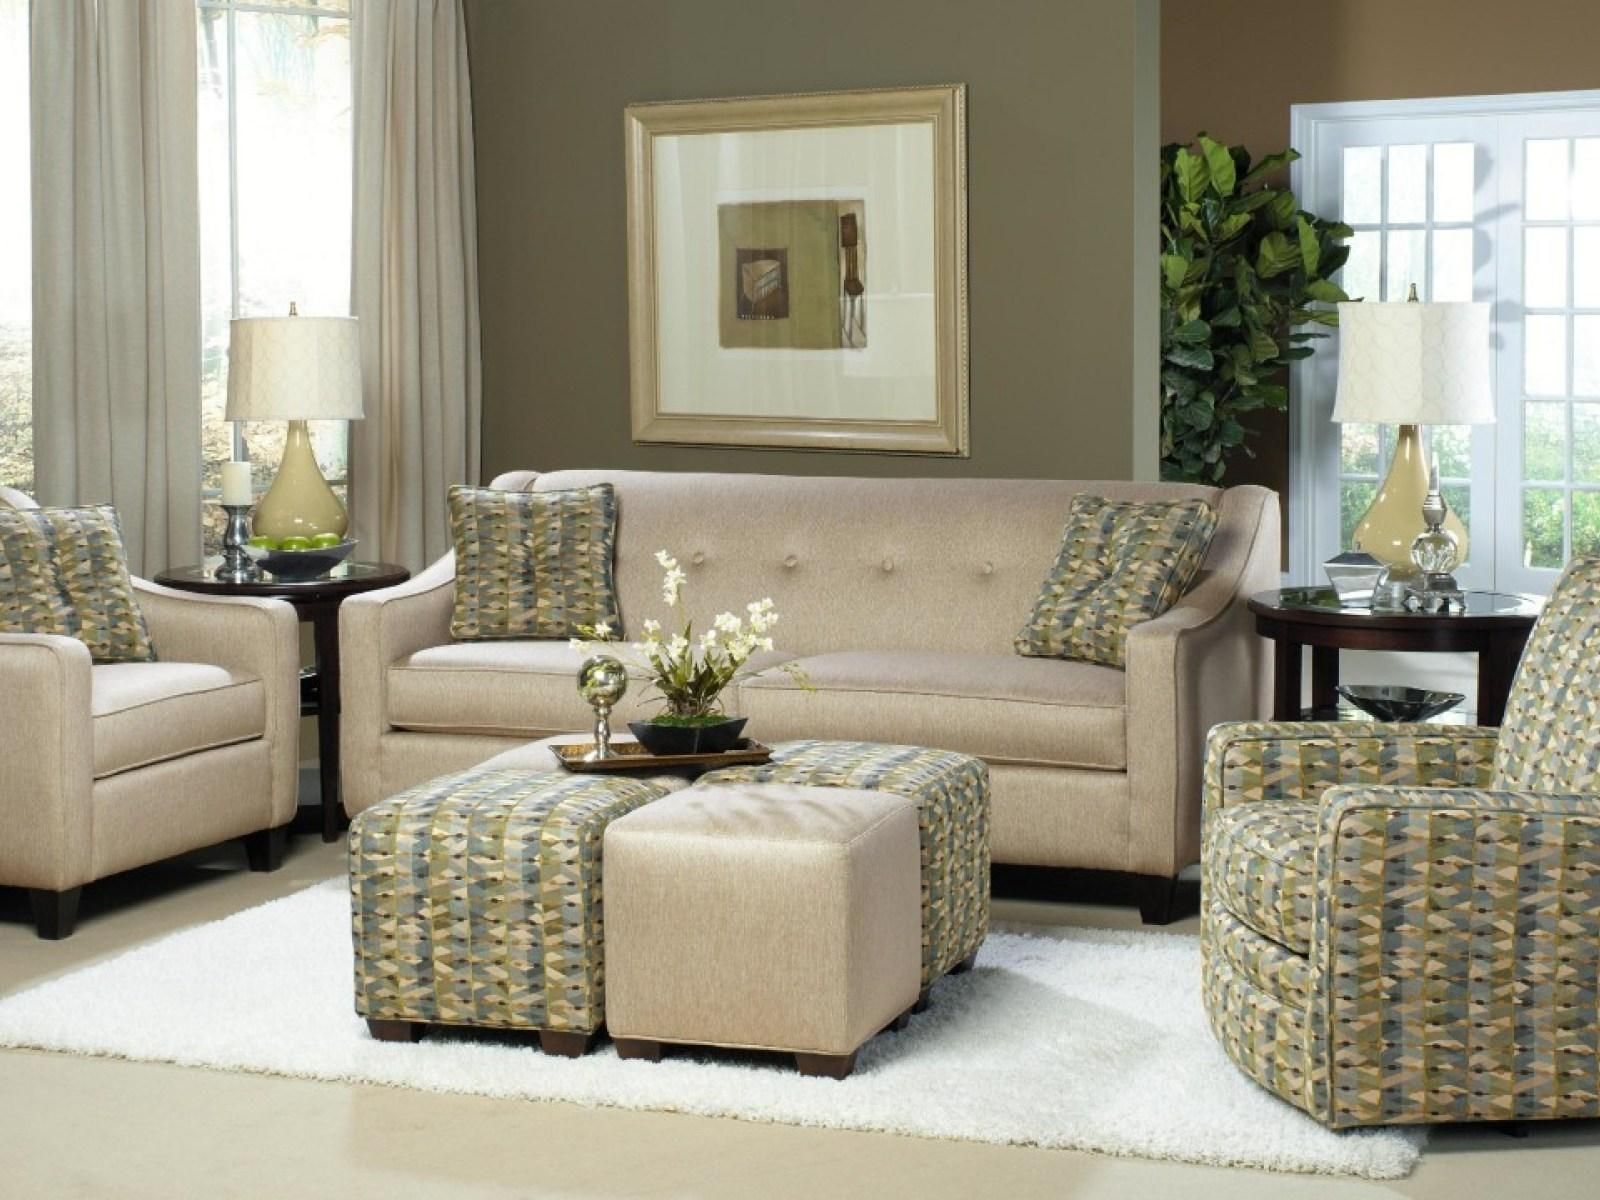 Sofas Center : Asian Sofa Set For Sale Cheap Aico Chesterfield For Asian Sofas (View 3 of 20)